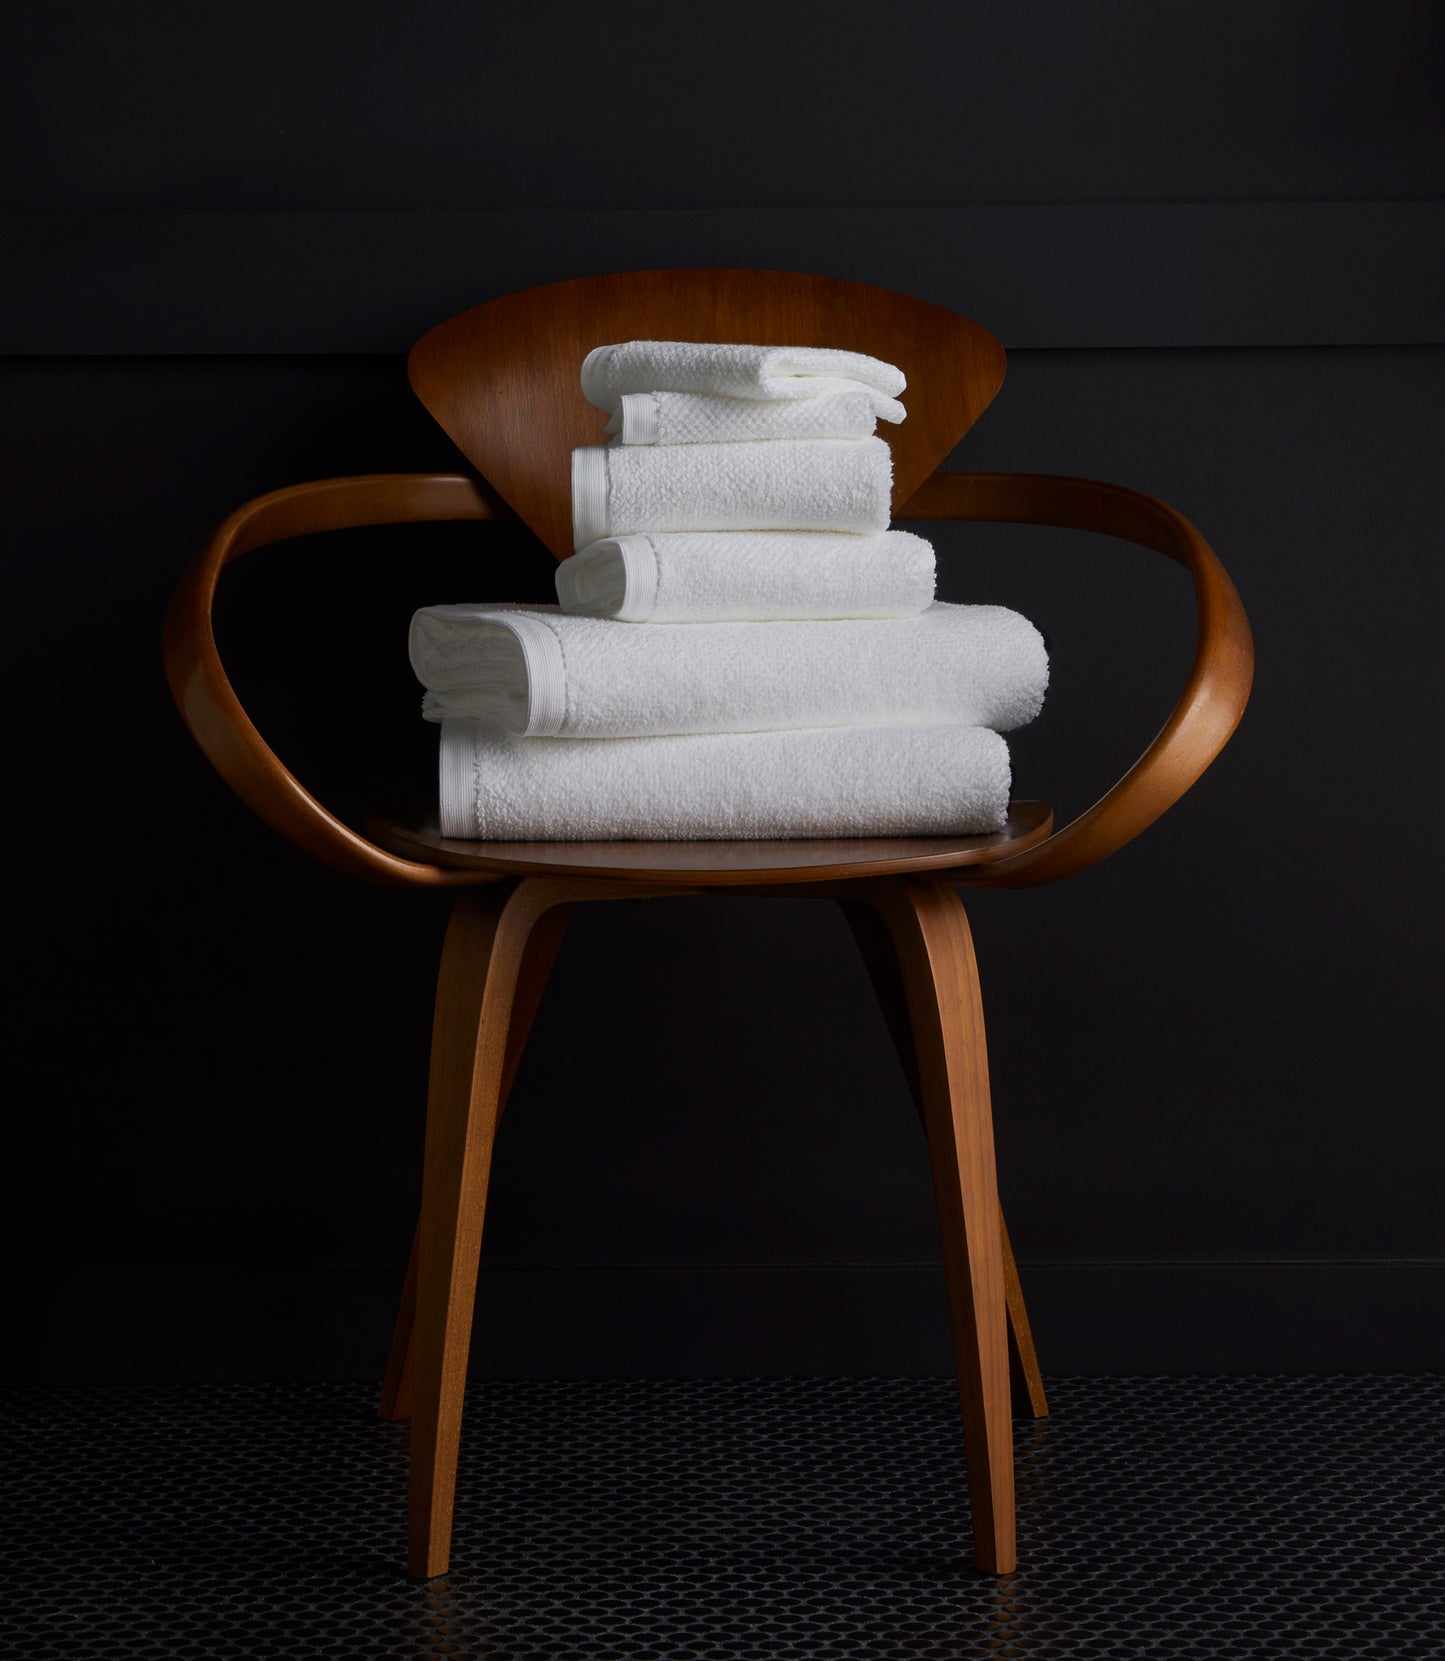 Jubilee Towel Set Detail Shot of White Bath Towels on a Wood Chair